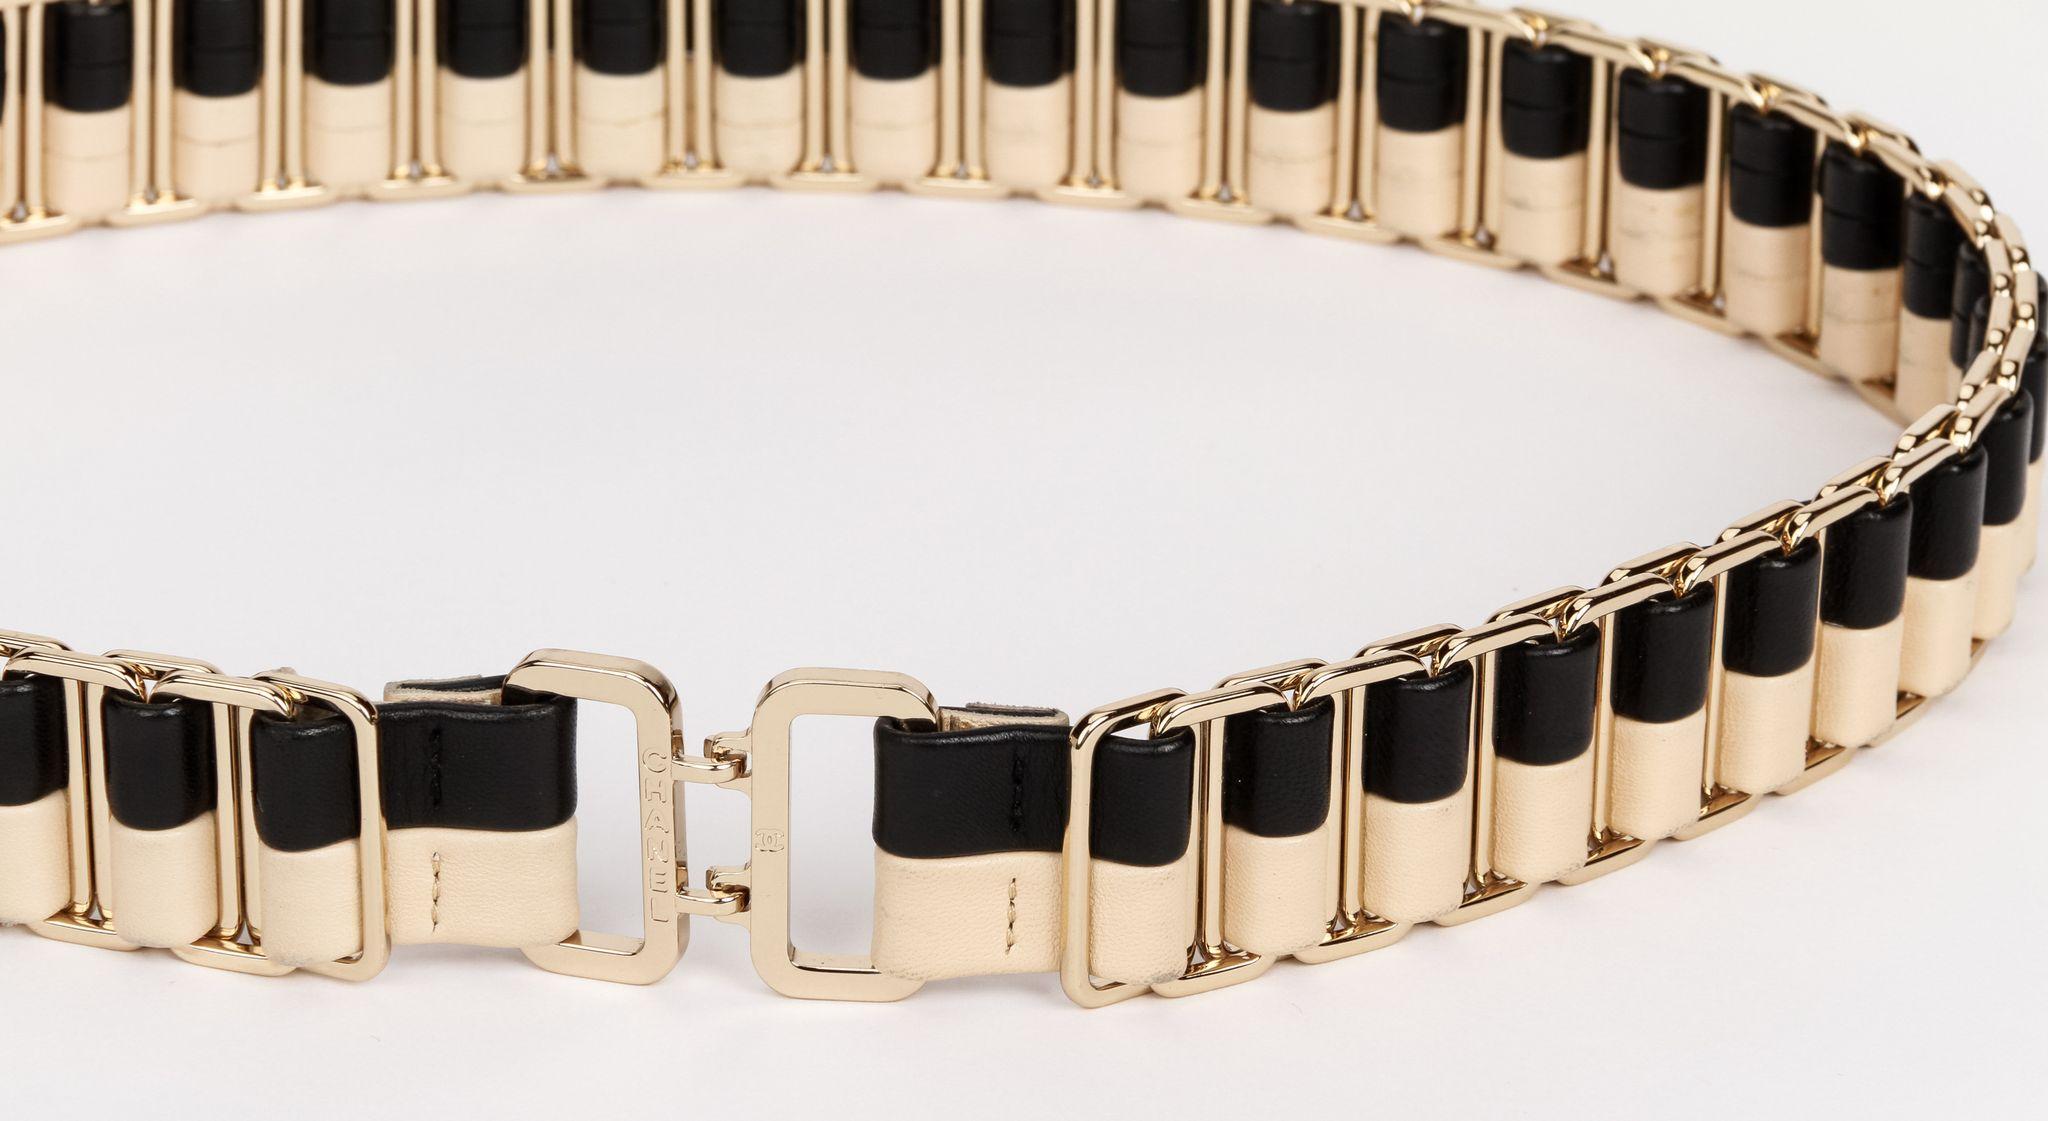 Chanel Cruise 2005 black and beige belt In Excellent Condition For Sale In West Hollywood, CA